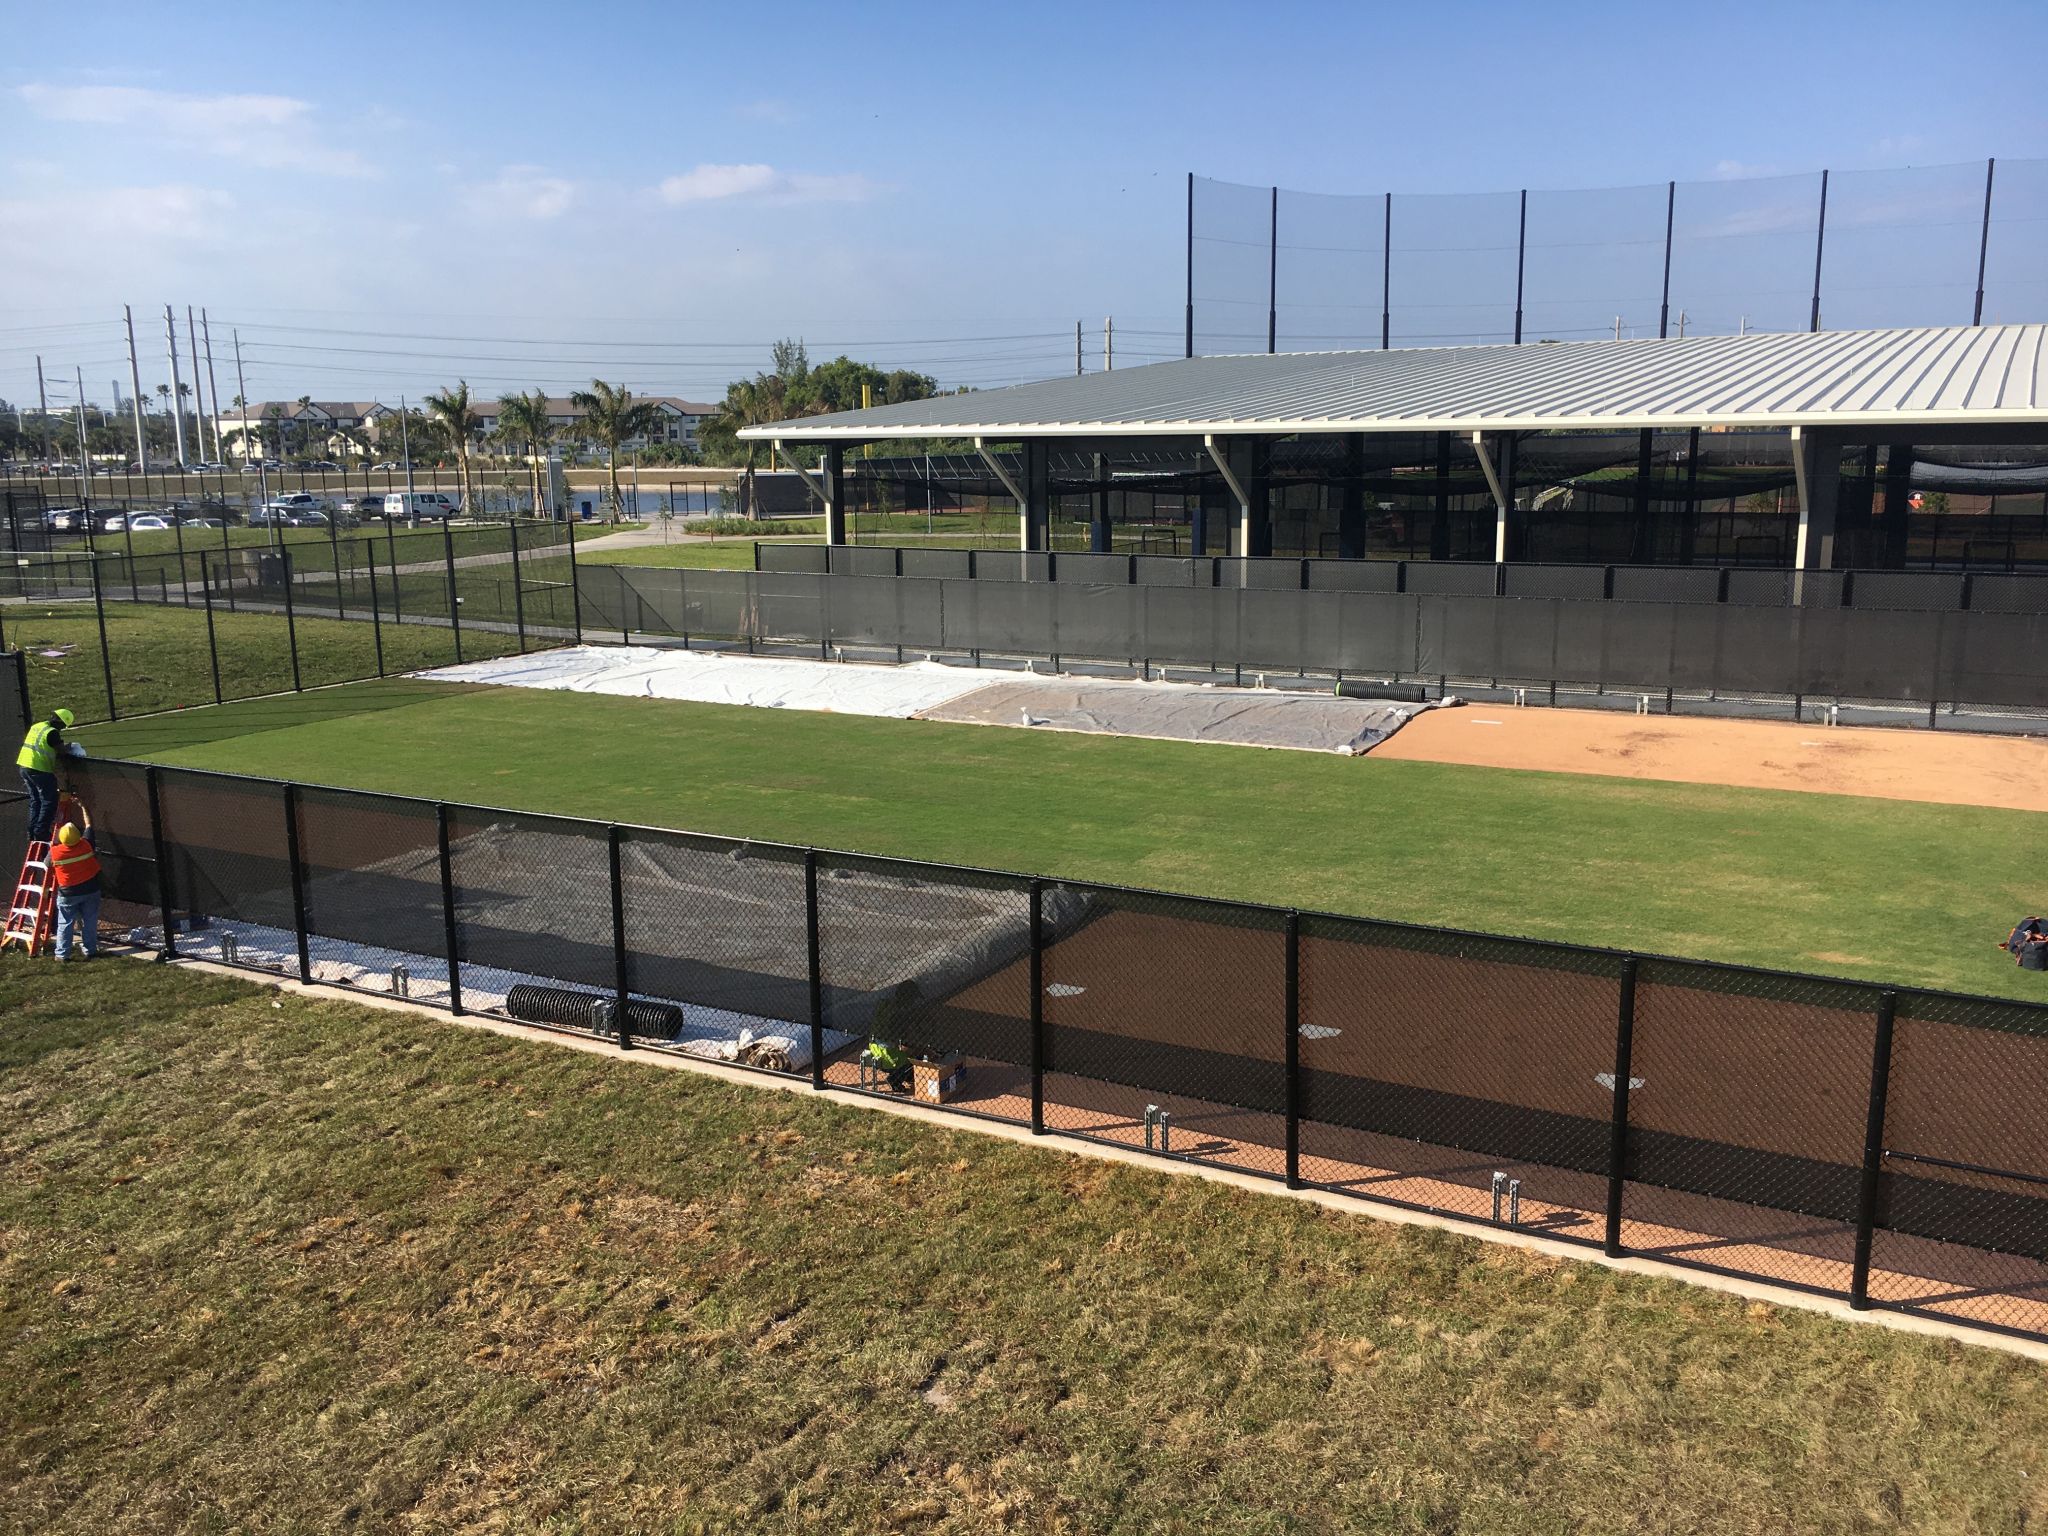 Sneak peek at the Astros' new spring training facility